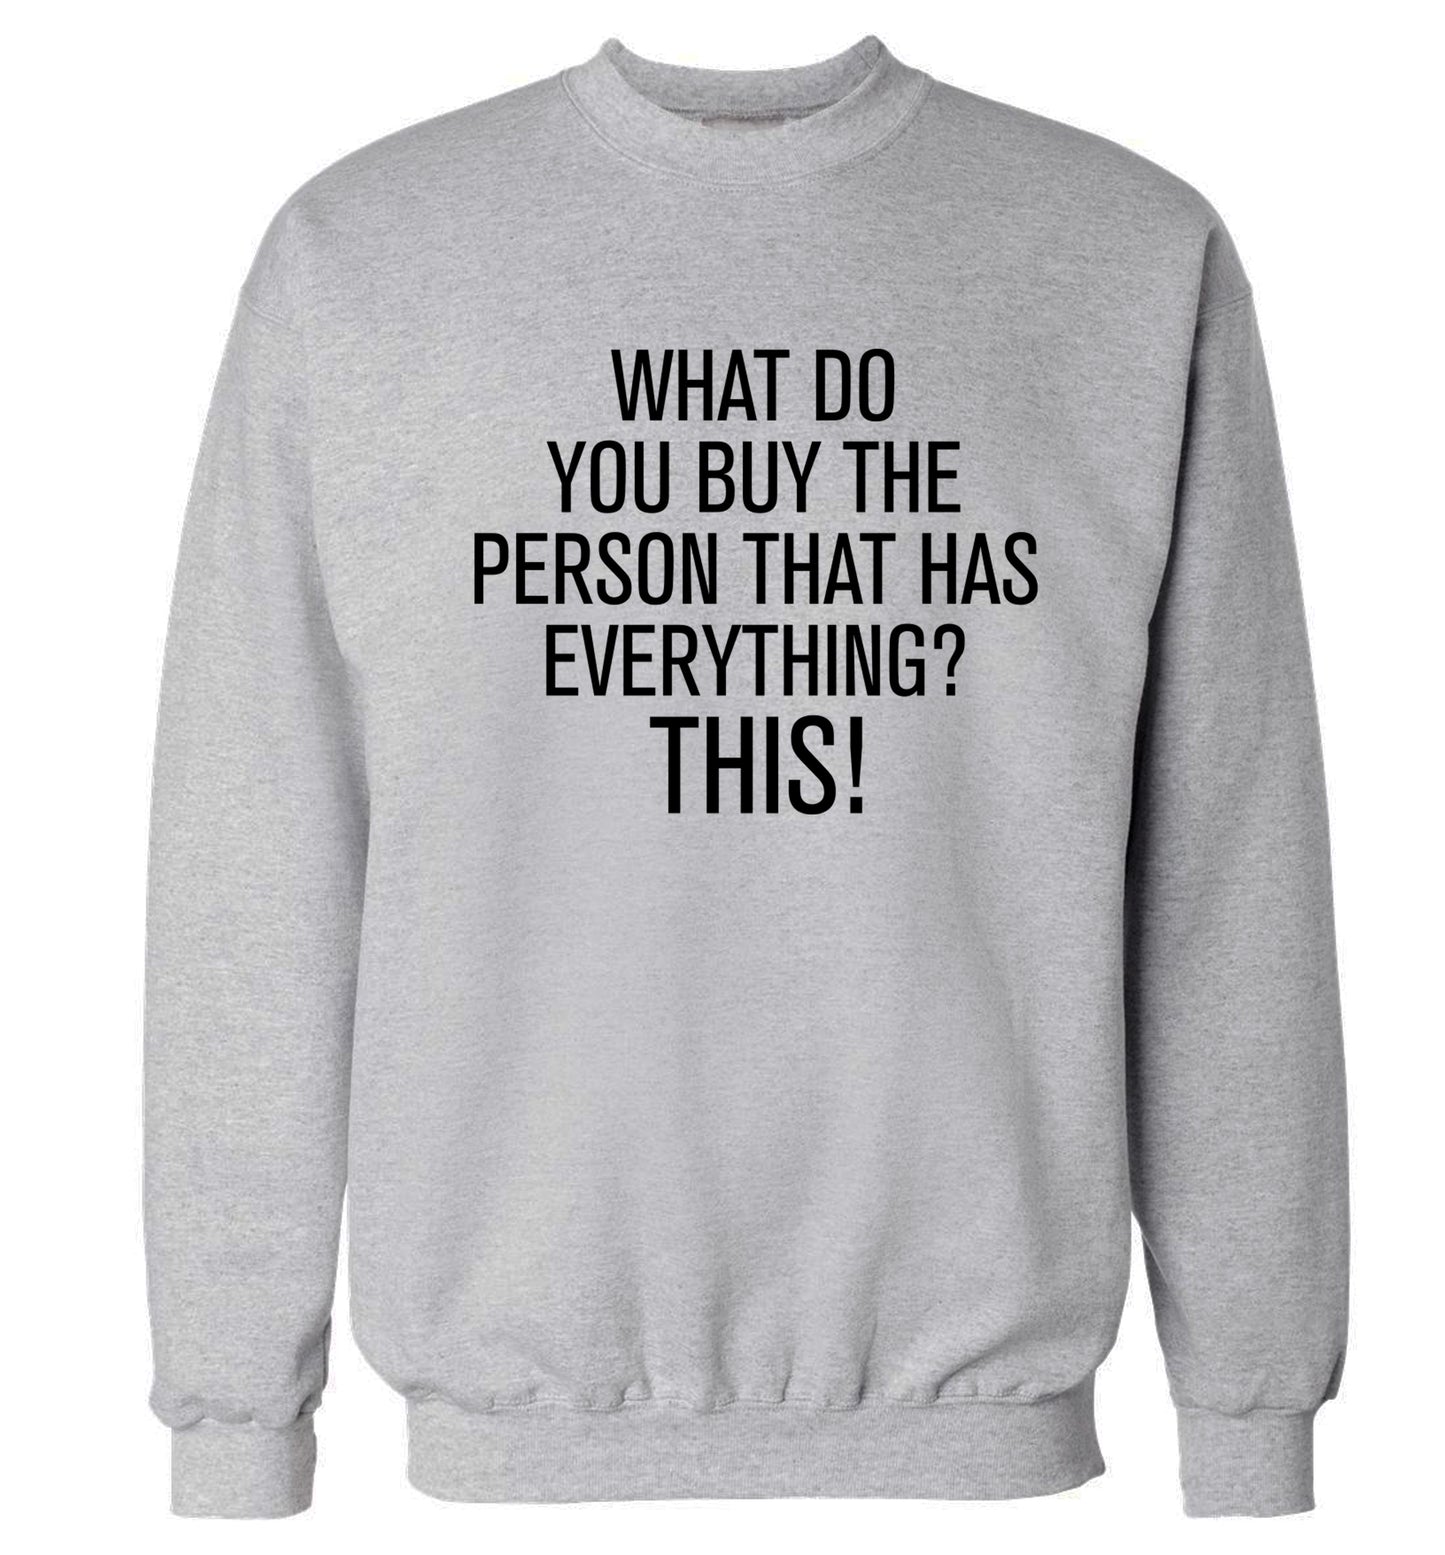 What do you buy the person that has everything? This! Adult's unisex grey Sweater 2XL